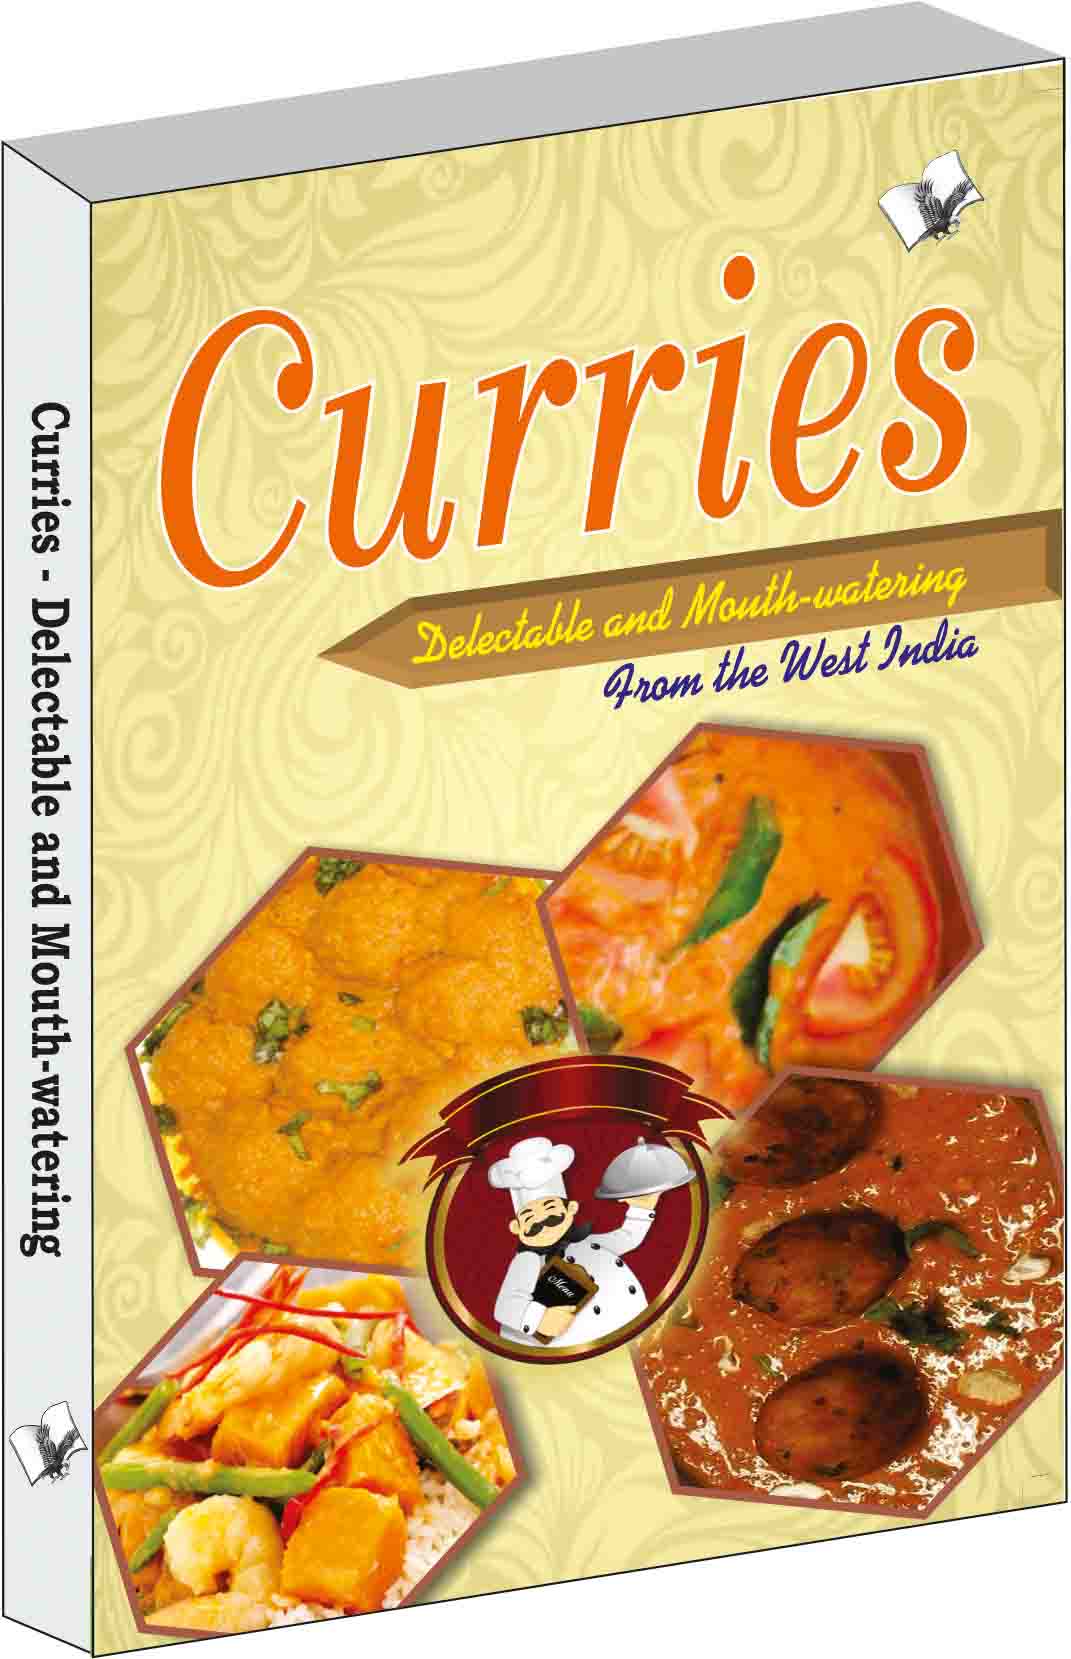 Curries - Delectable and Mouth watering-Light, healthy yet tasty